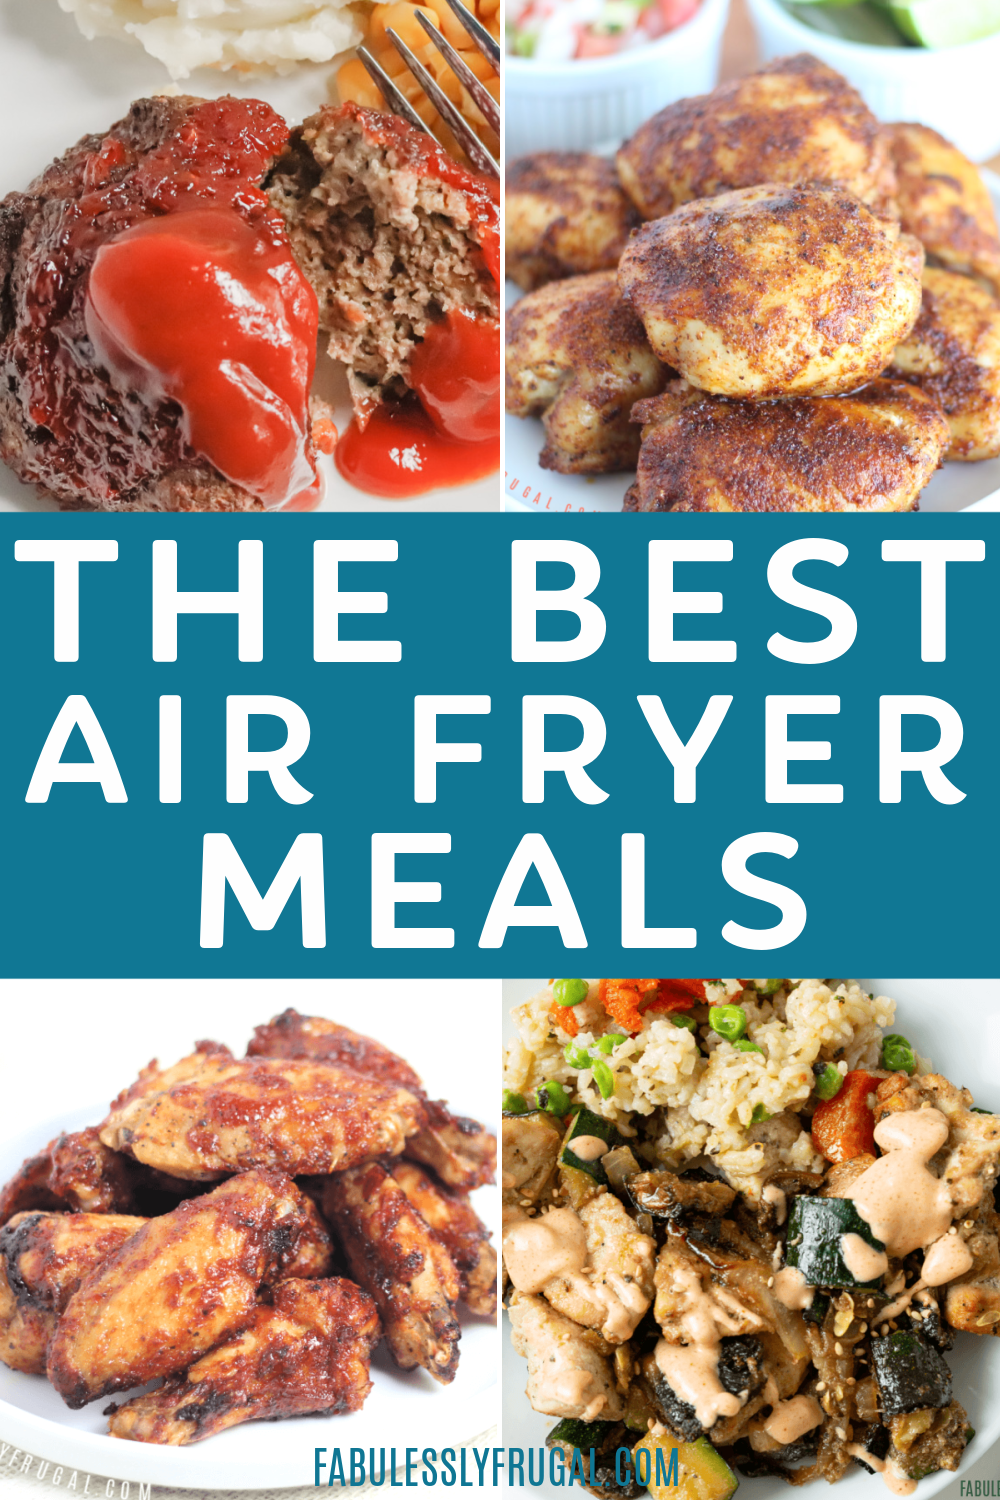 https://fabulesslyfrugal.com/wp-content/uploads/2022/12/The-Best-Air-Fryer-Recipes-Ever-2.png